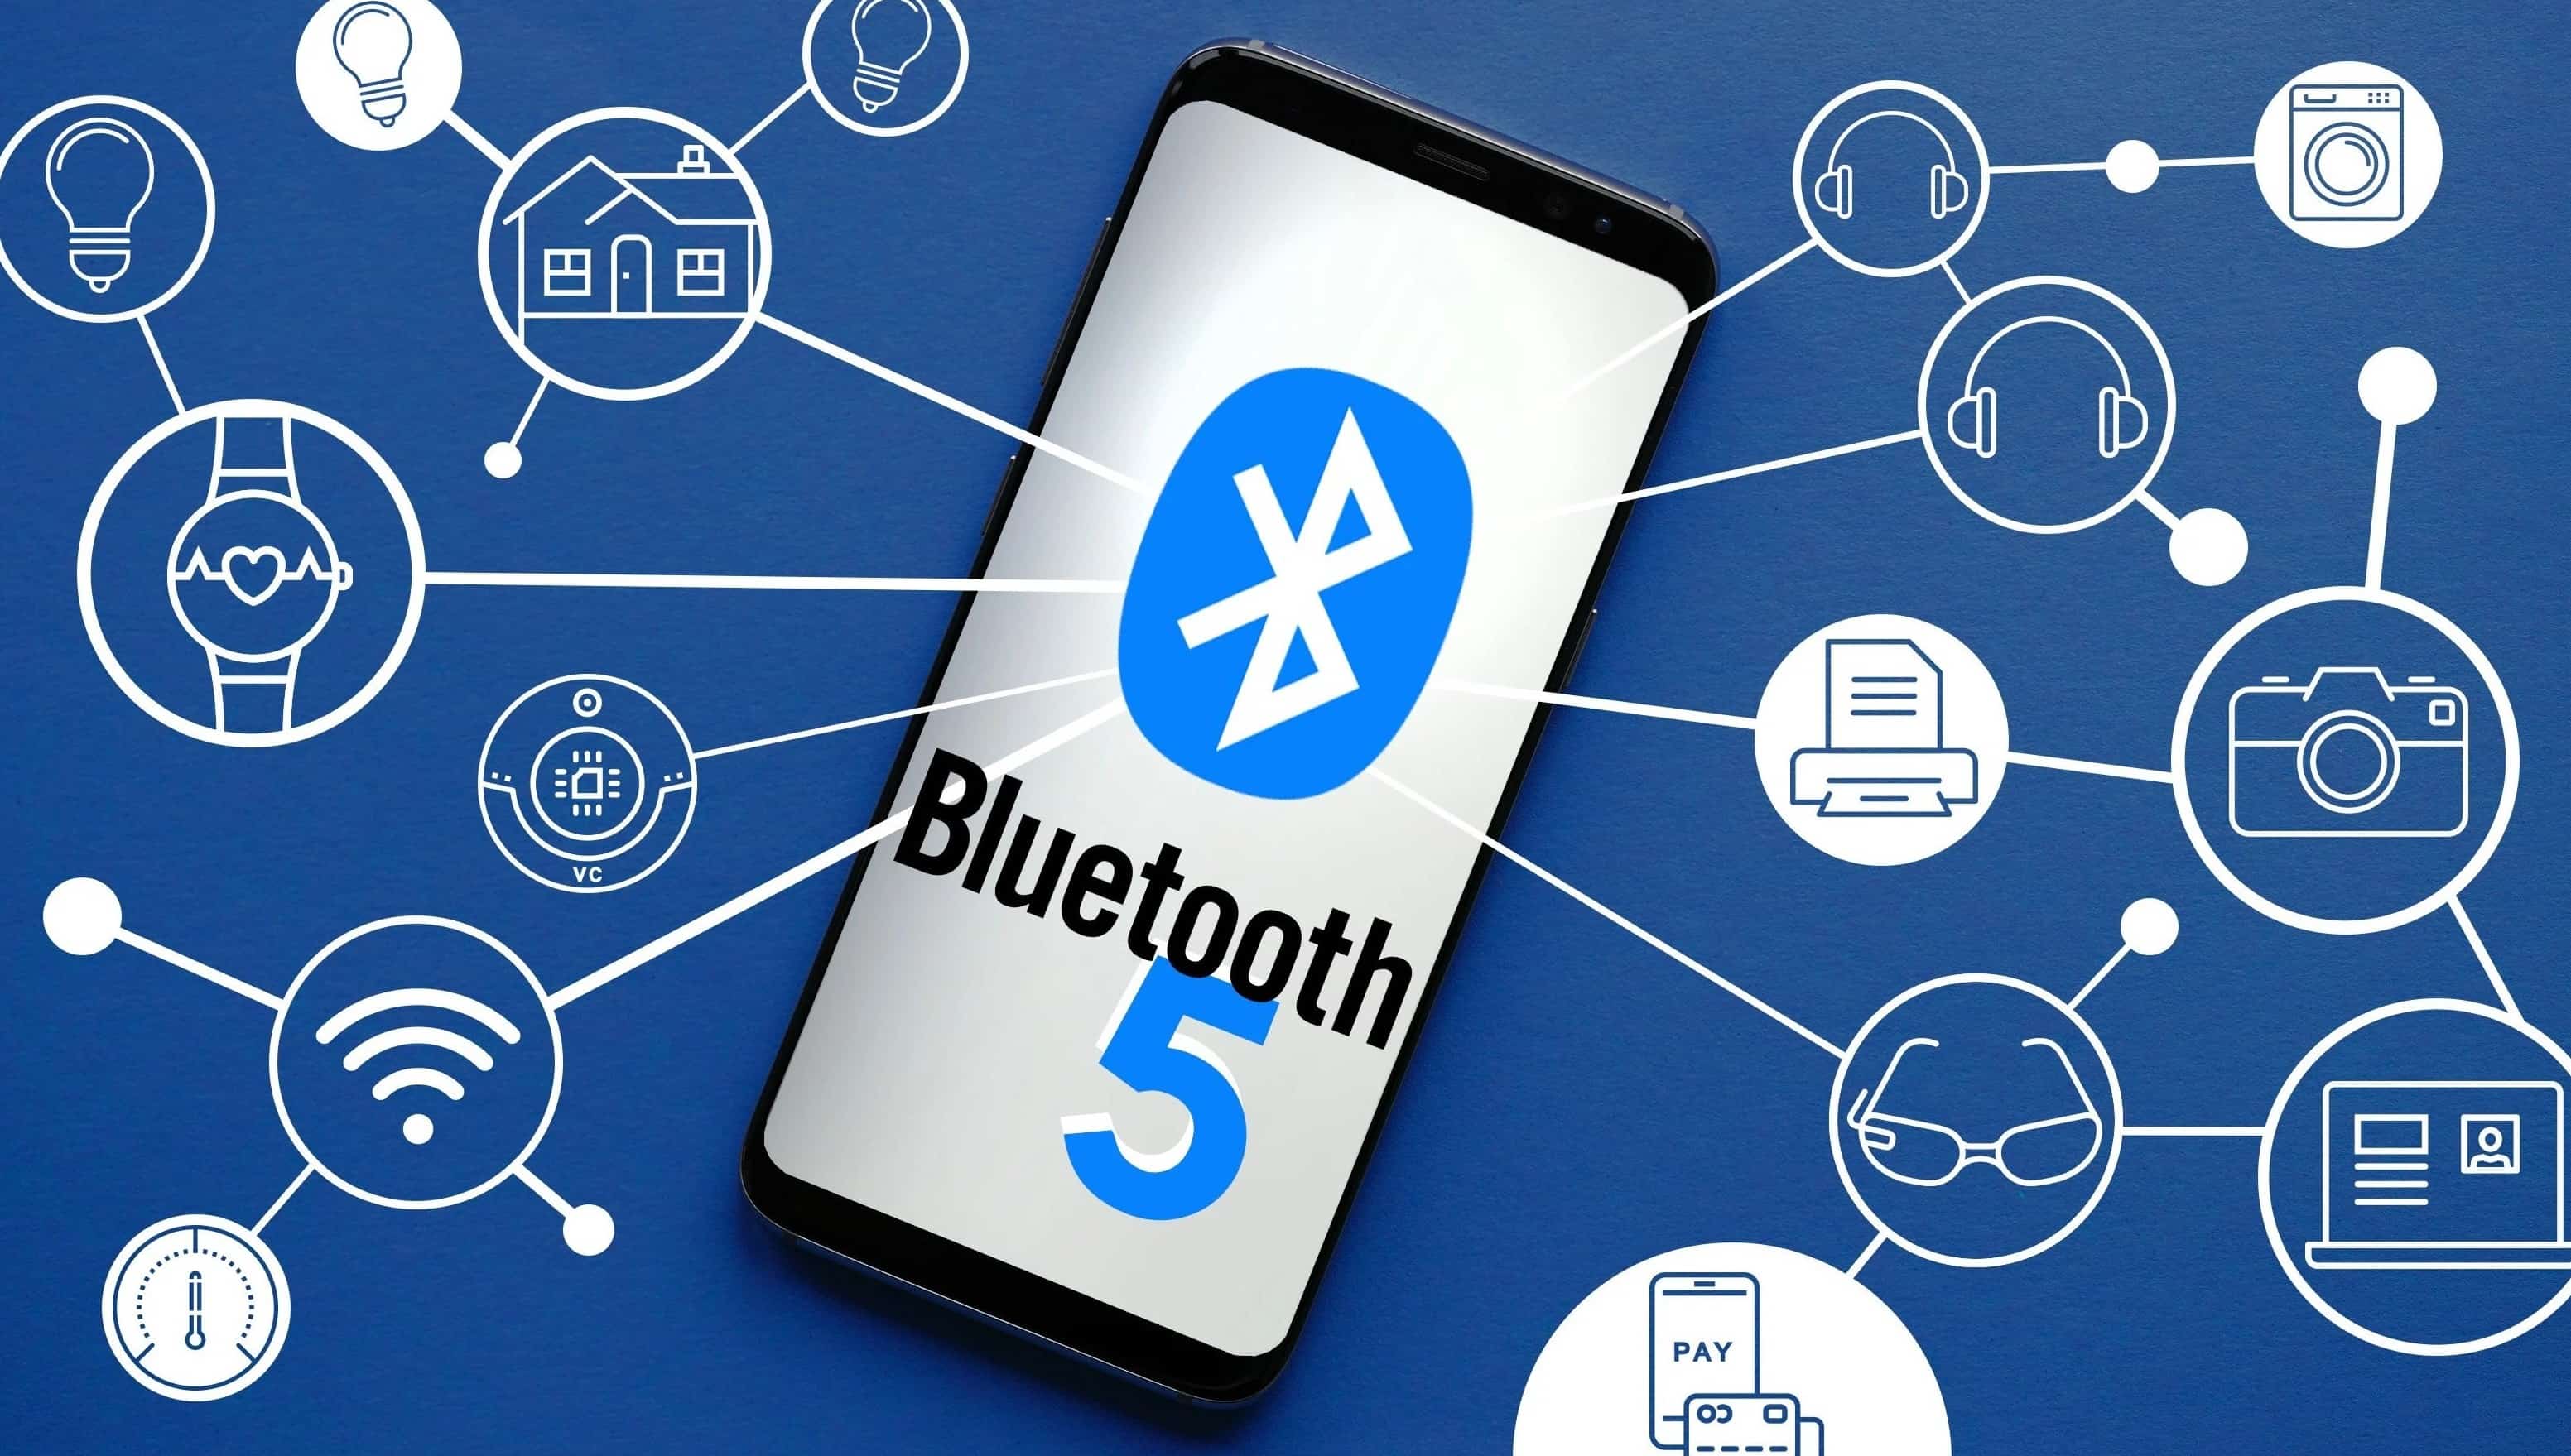 20-facts-about-bluetooth